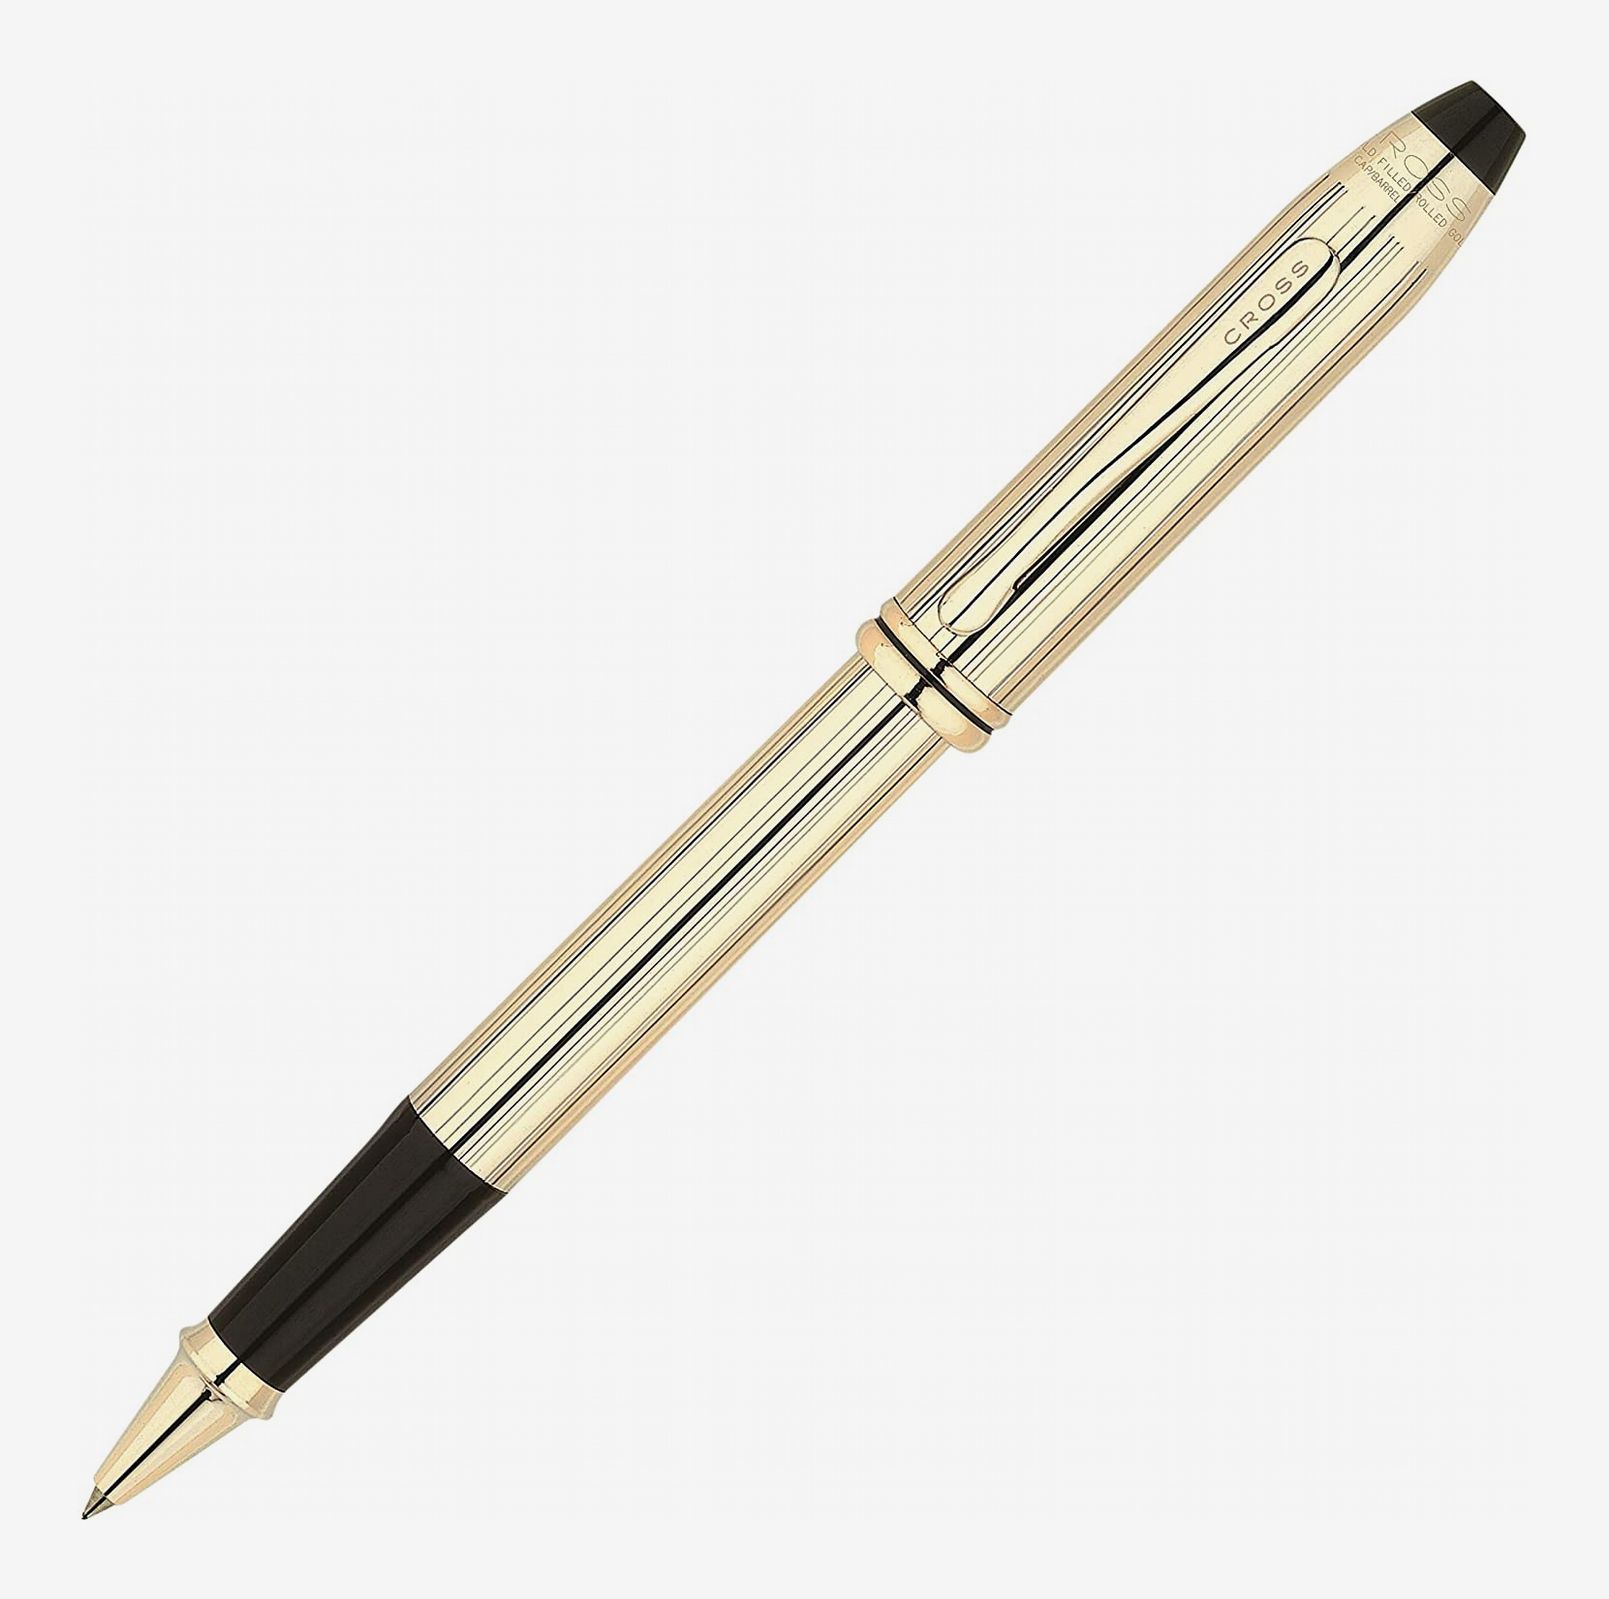 The President of the United States Gold Roller Ball Pen with its